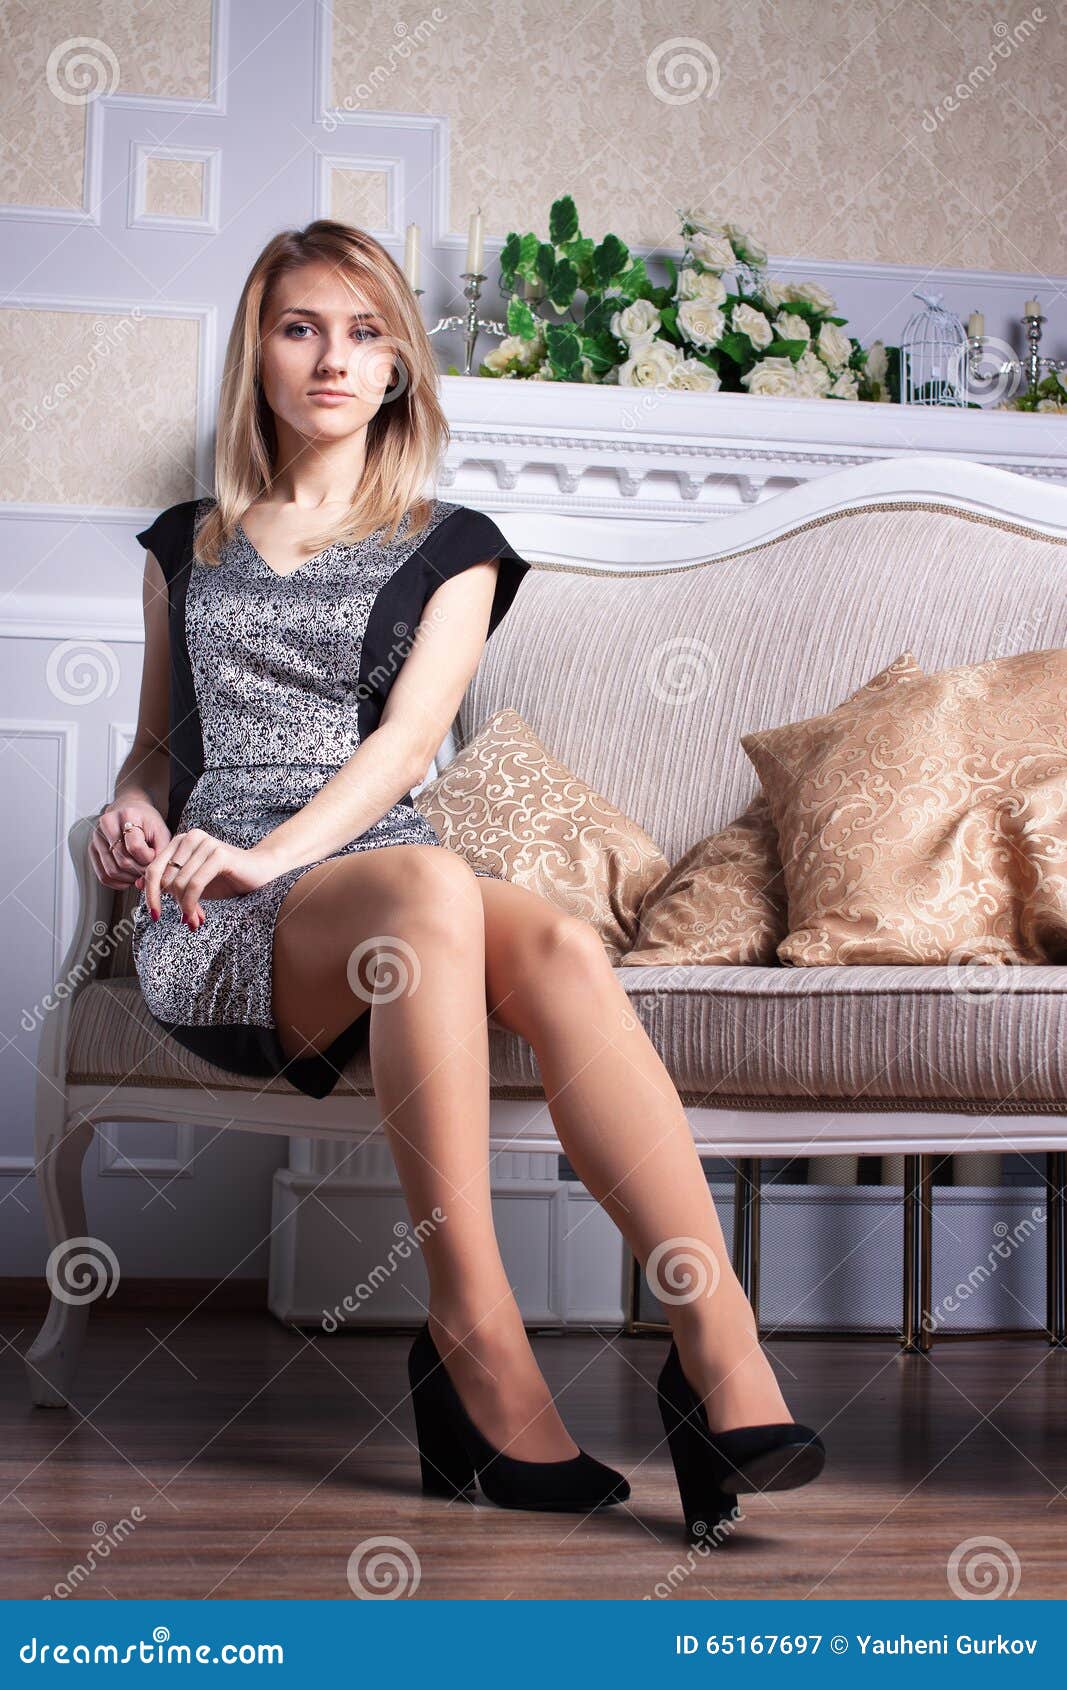 Woman in Dress Sitting on Sofa Stock Image - Image of indoors, room ...